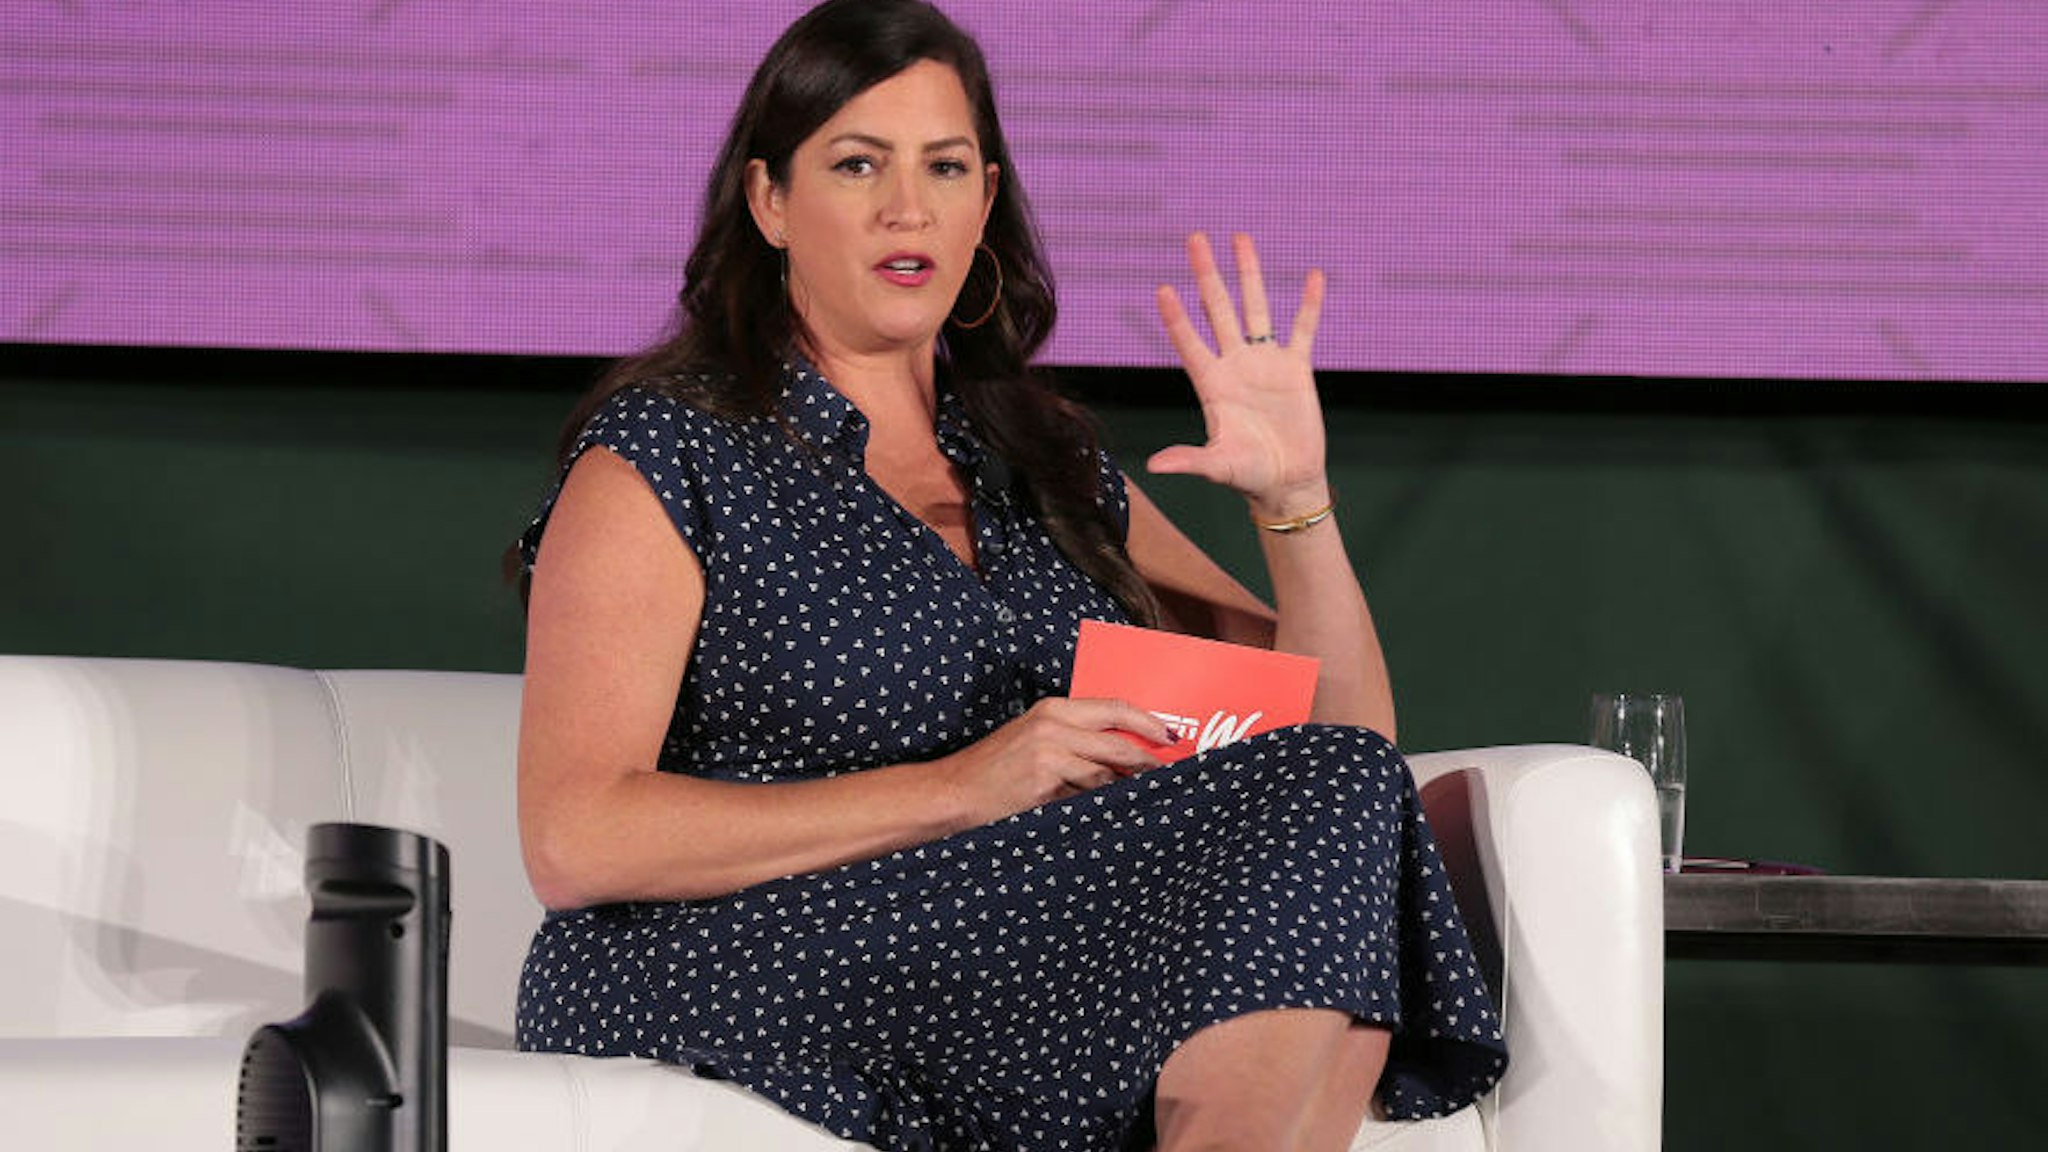 Sarah Spain attends The Annual espnW: Women + Sports Summit day 1 at The Lodge at Torrey Pines on October 18, 2021 in La Jolla, California.